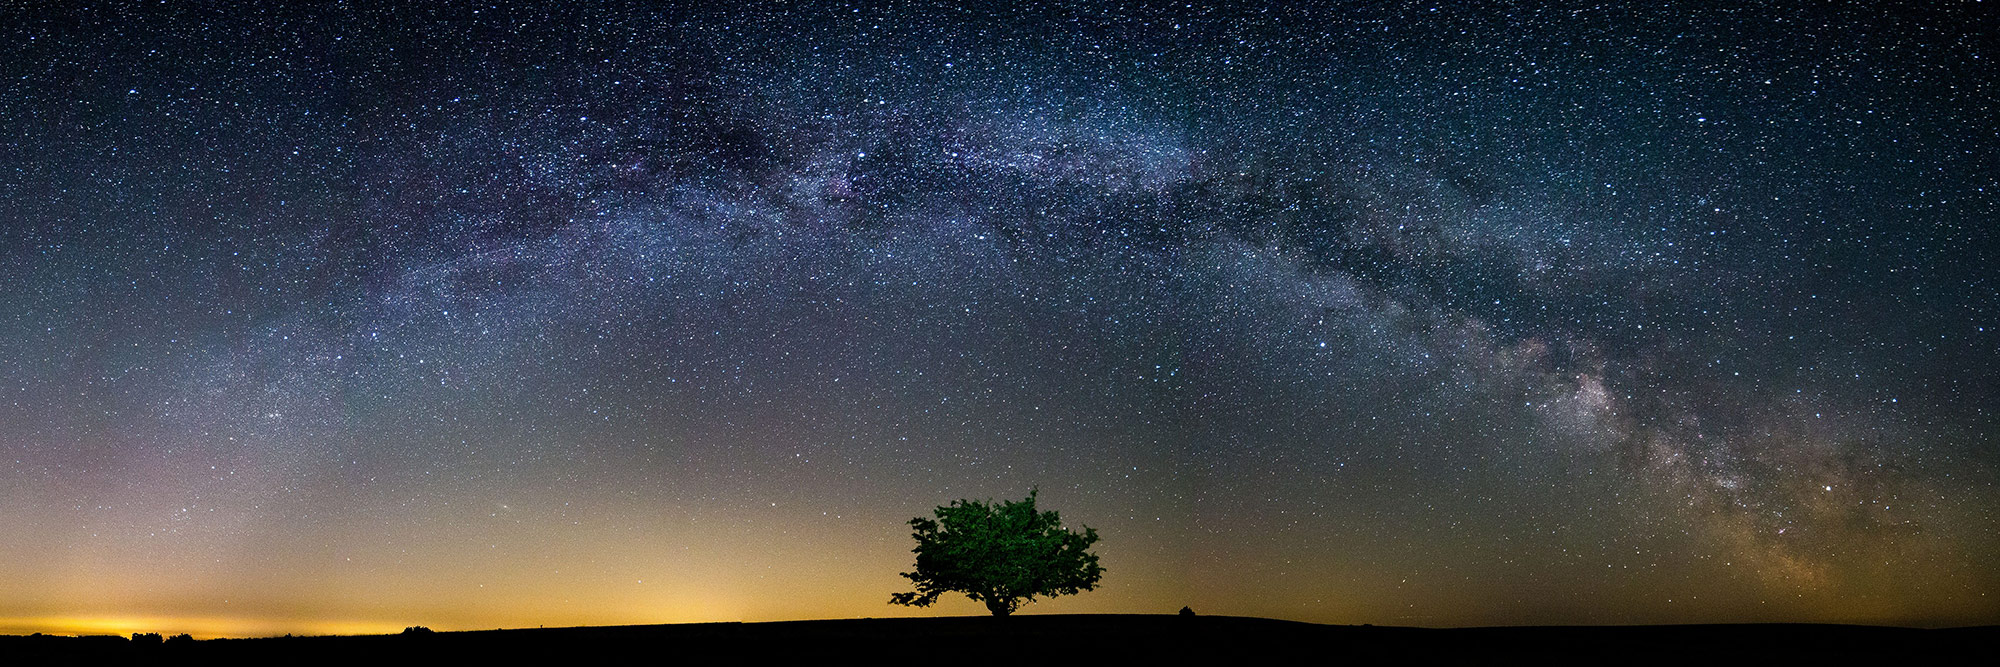 Milky way stars over a long tree on a moor